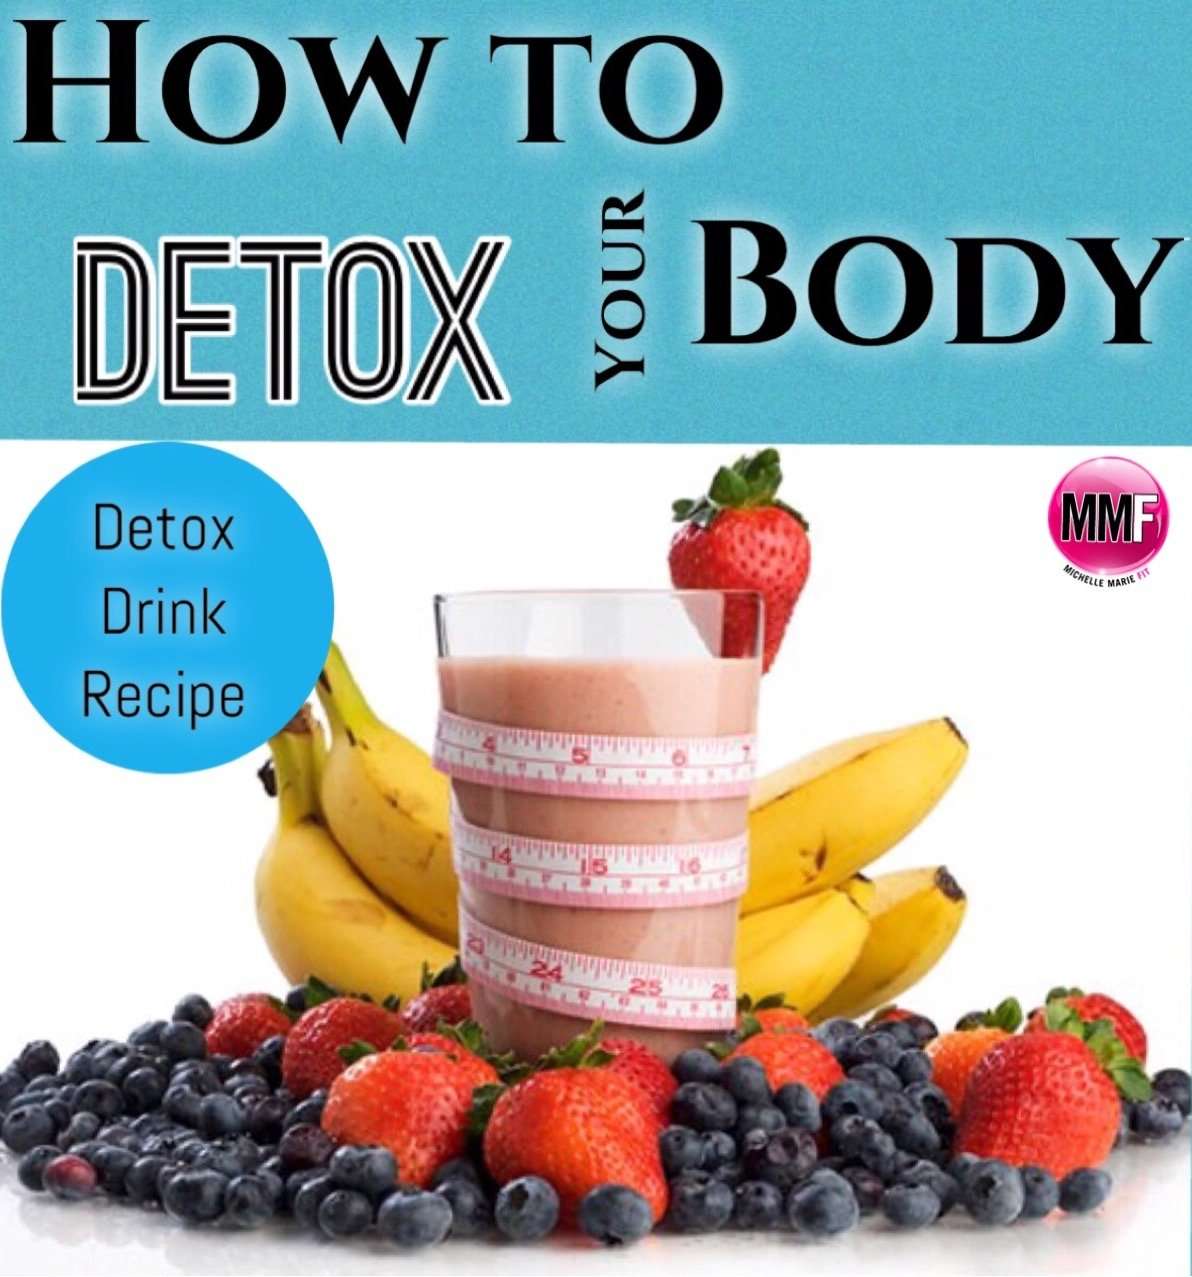 How To Detox Your Body &  A Detox Drink Recipe